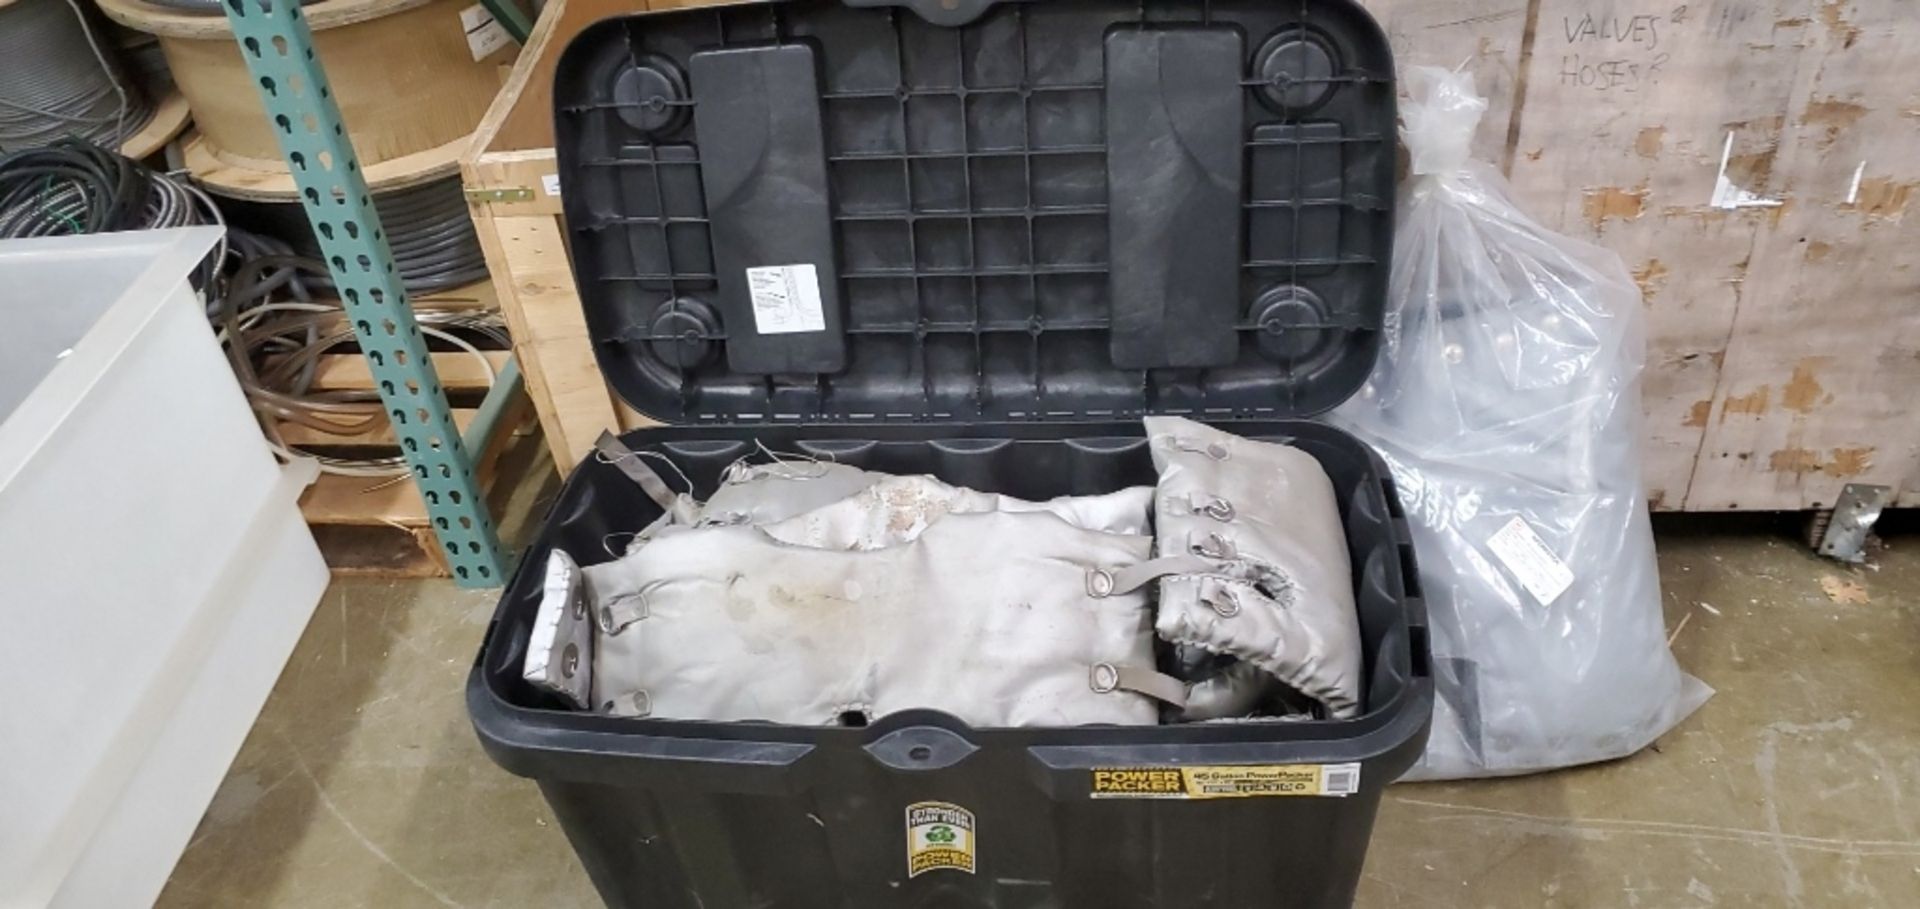 45 Gallon Capacity Tote with Insulation - Image 2 of 4